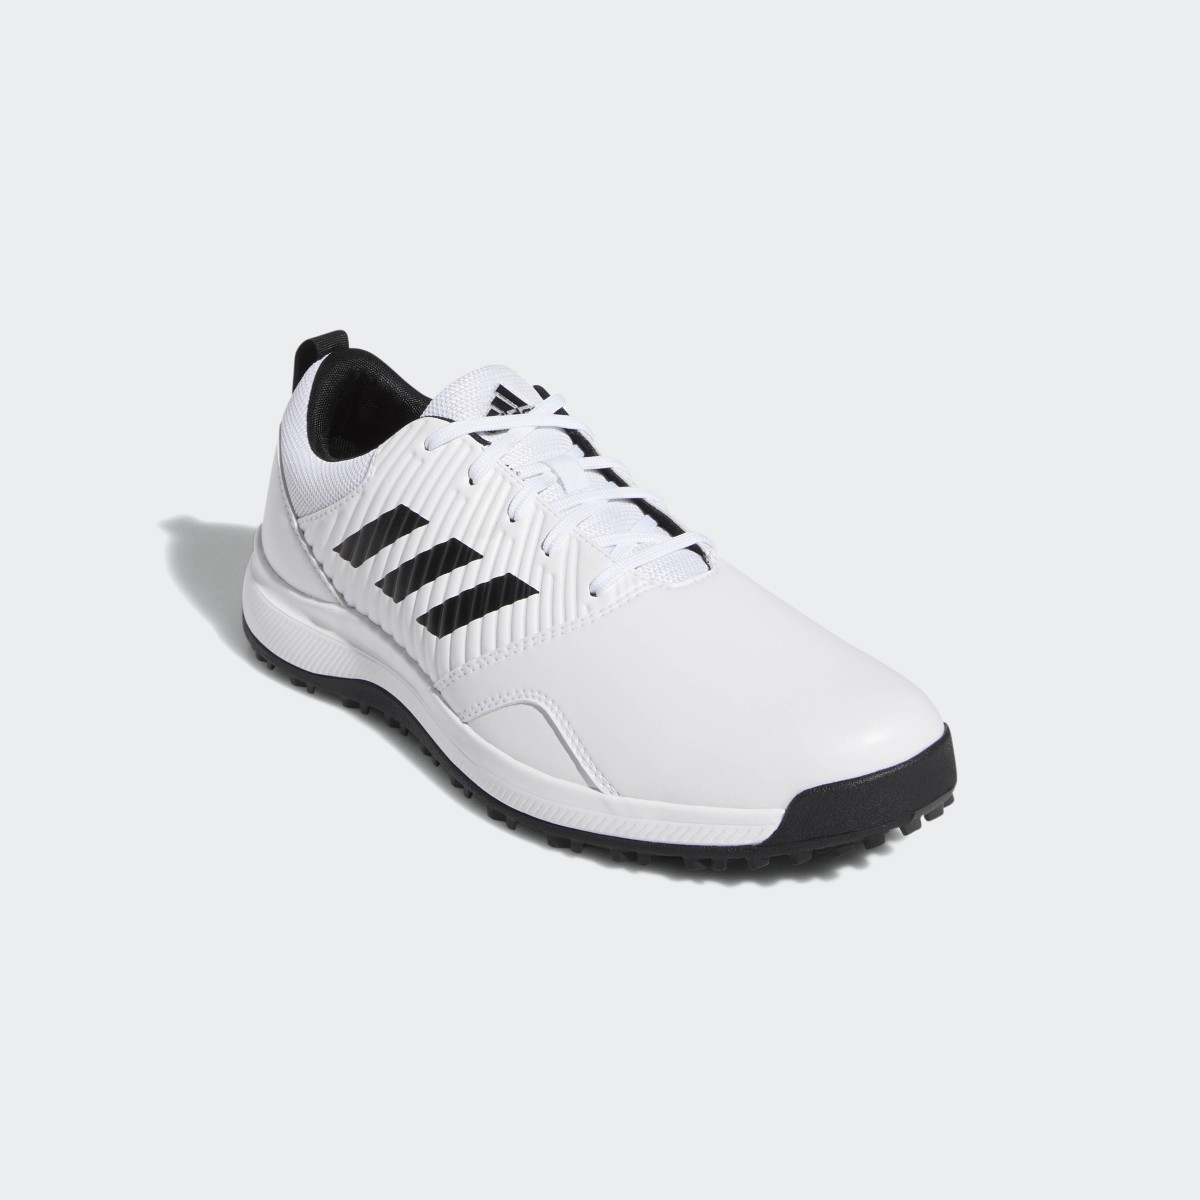 Adidas CP Traxion Spikeless Golf Shoes. 6